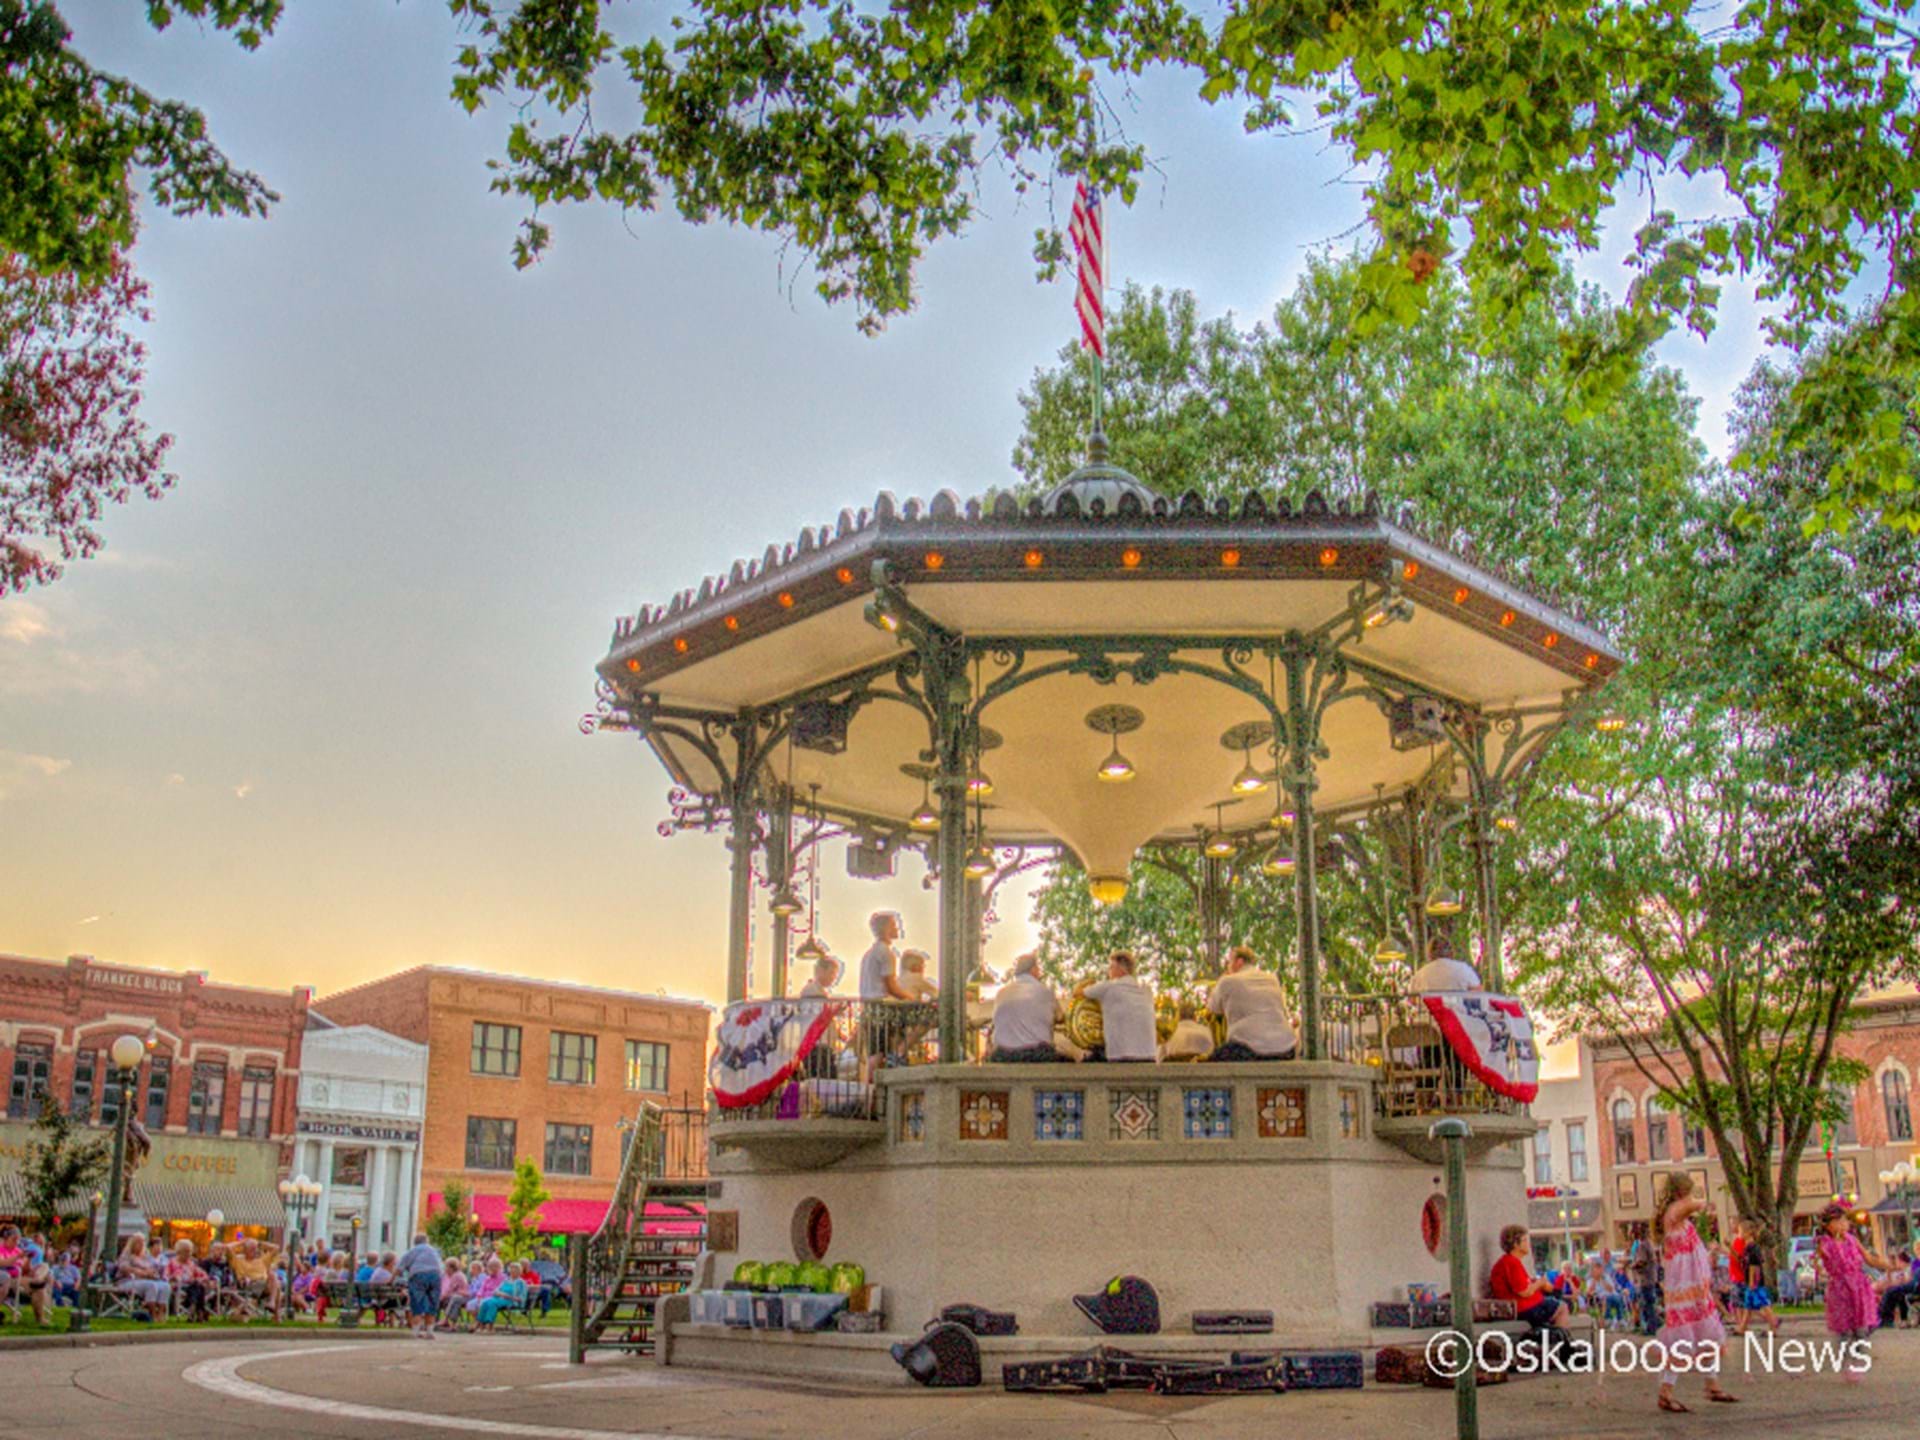 The bandstand sits in the middle of the city square.